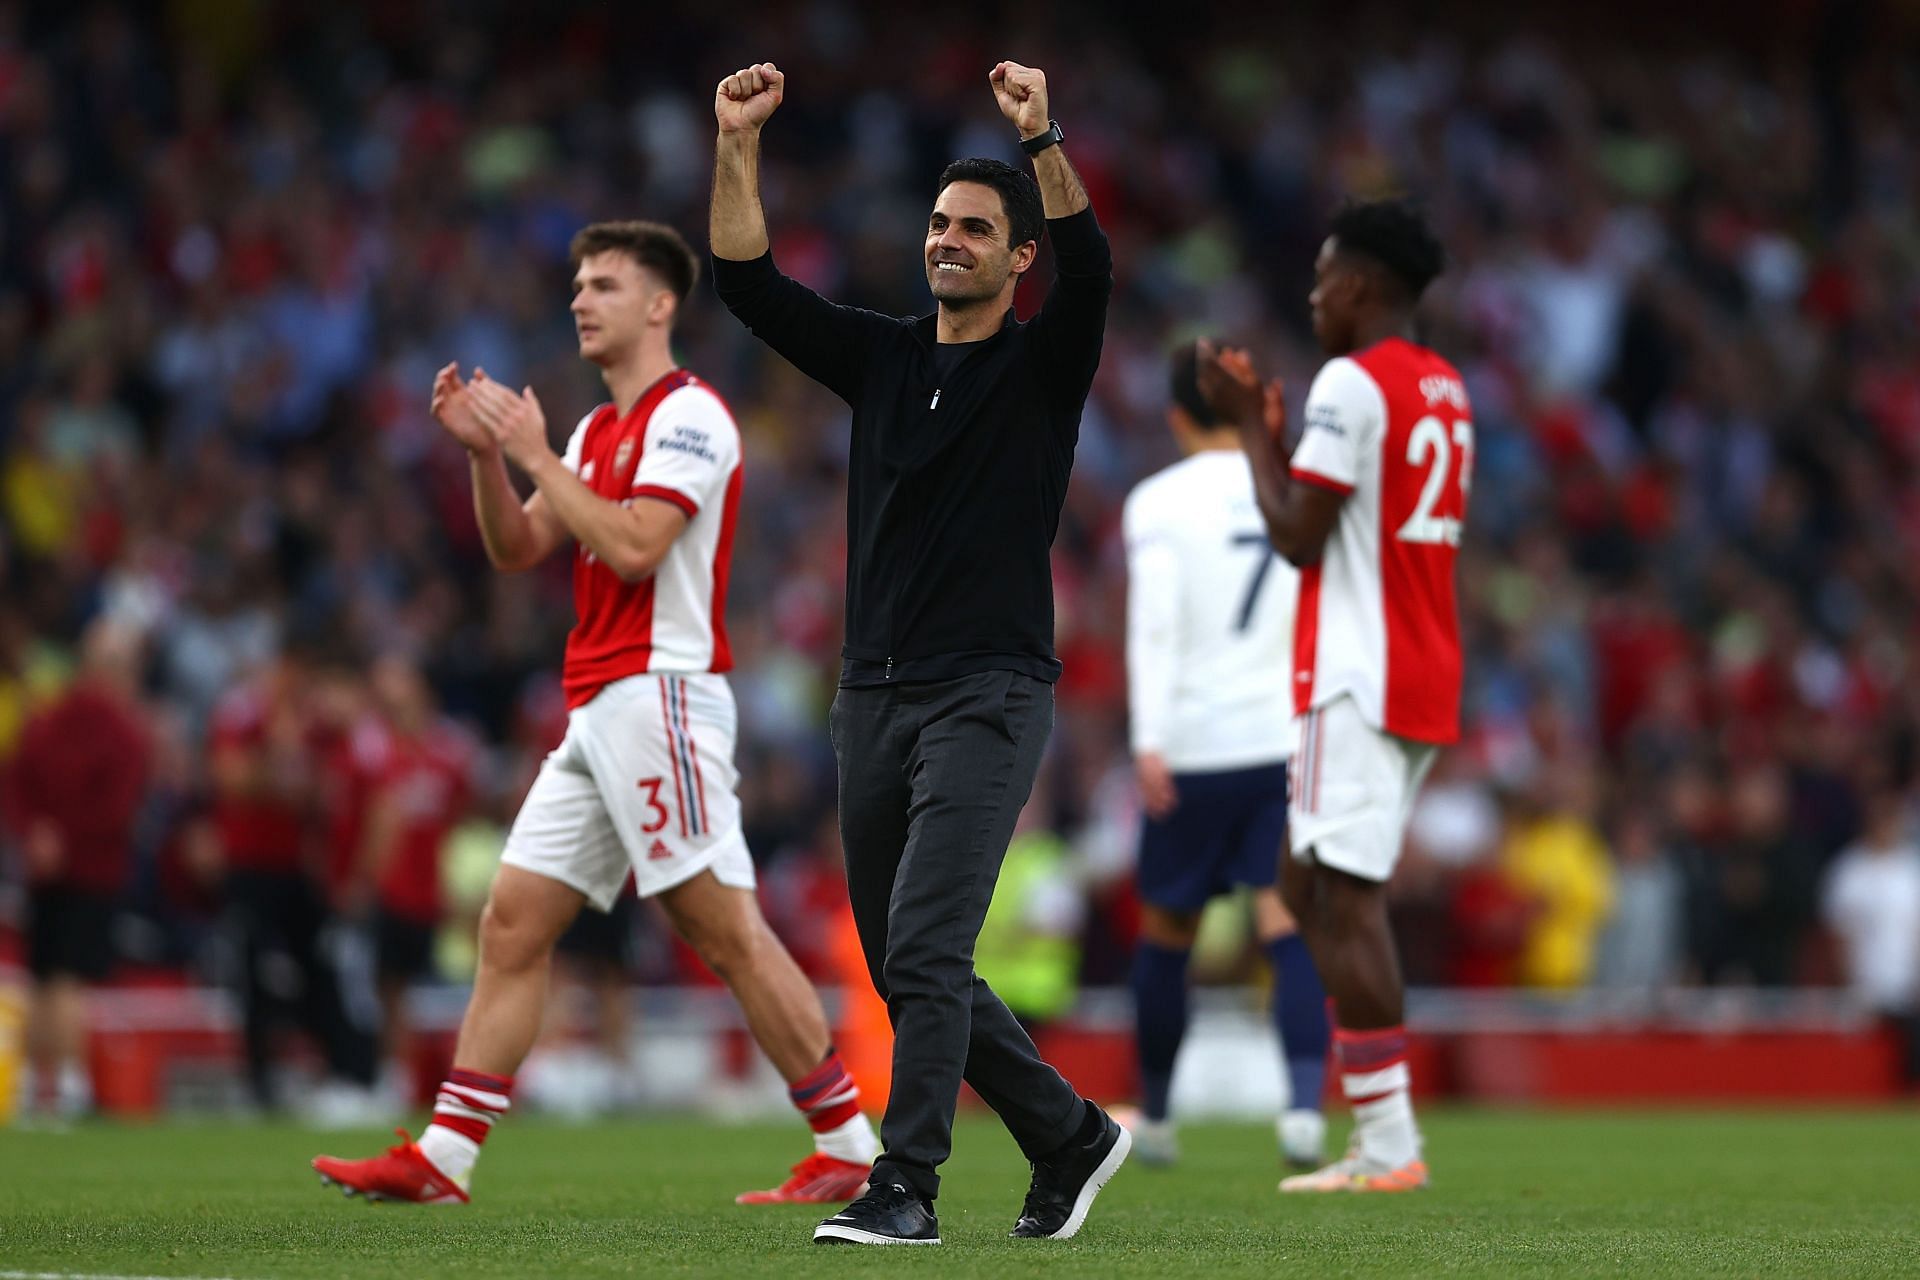 Arsenal manager Mikel Arteta has taken his team to fifth place in the Premier League.